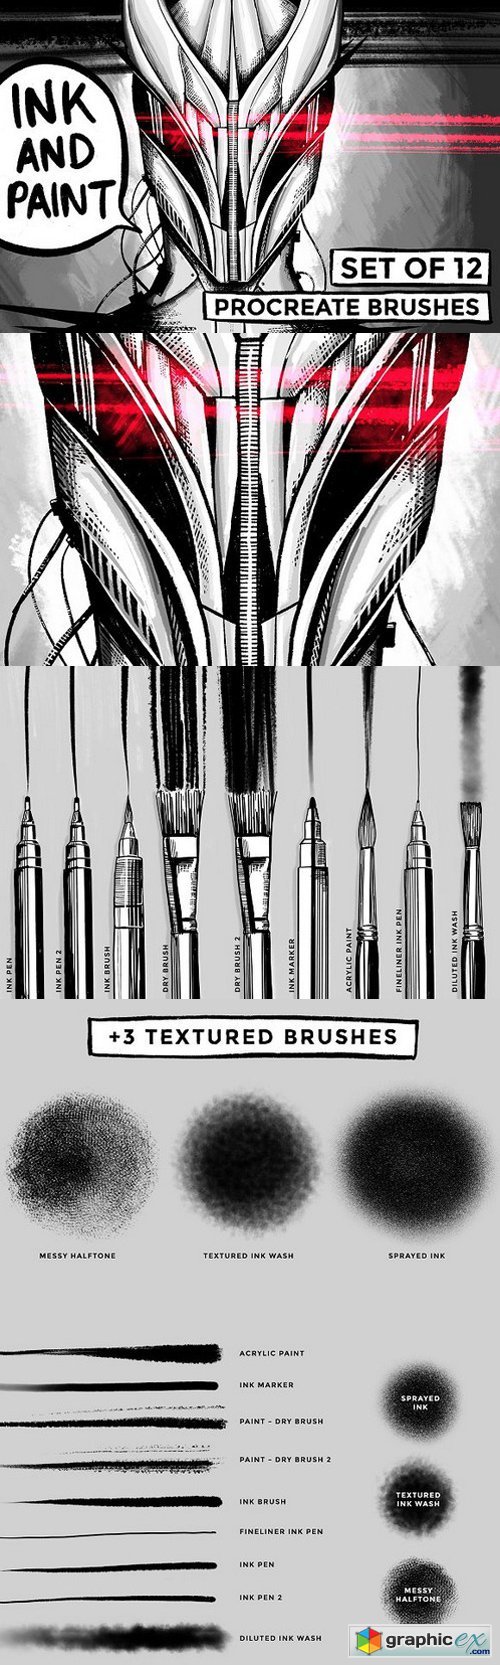 Ink and paint Procreate brushes